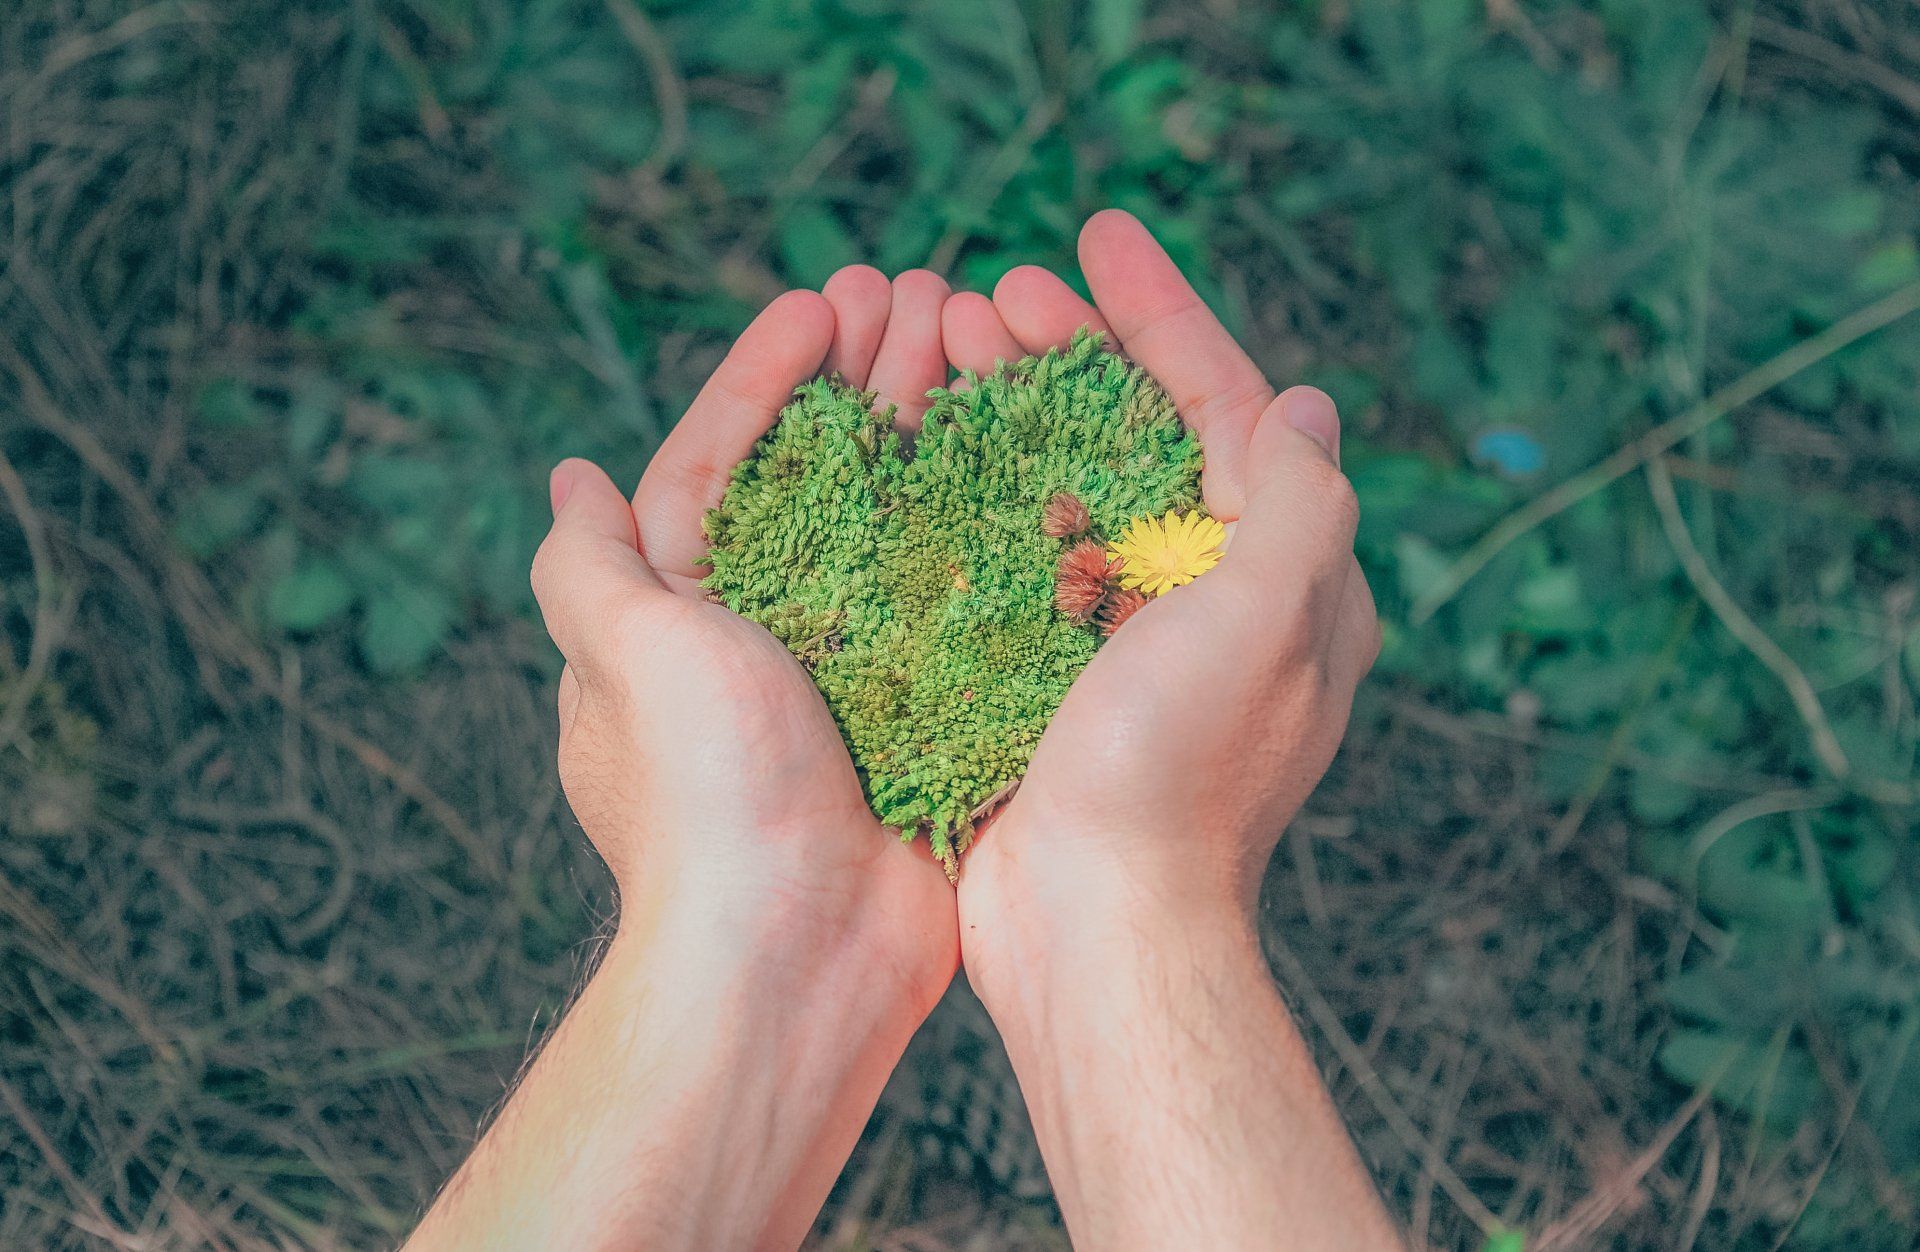 a person is holding a heart made of grass in their hands .